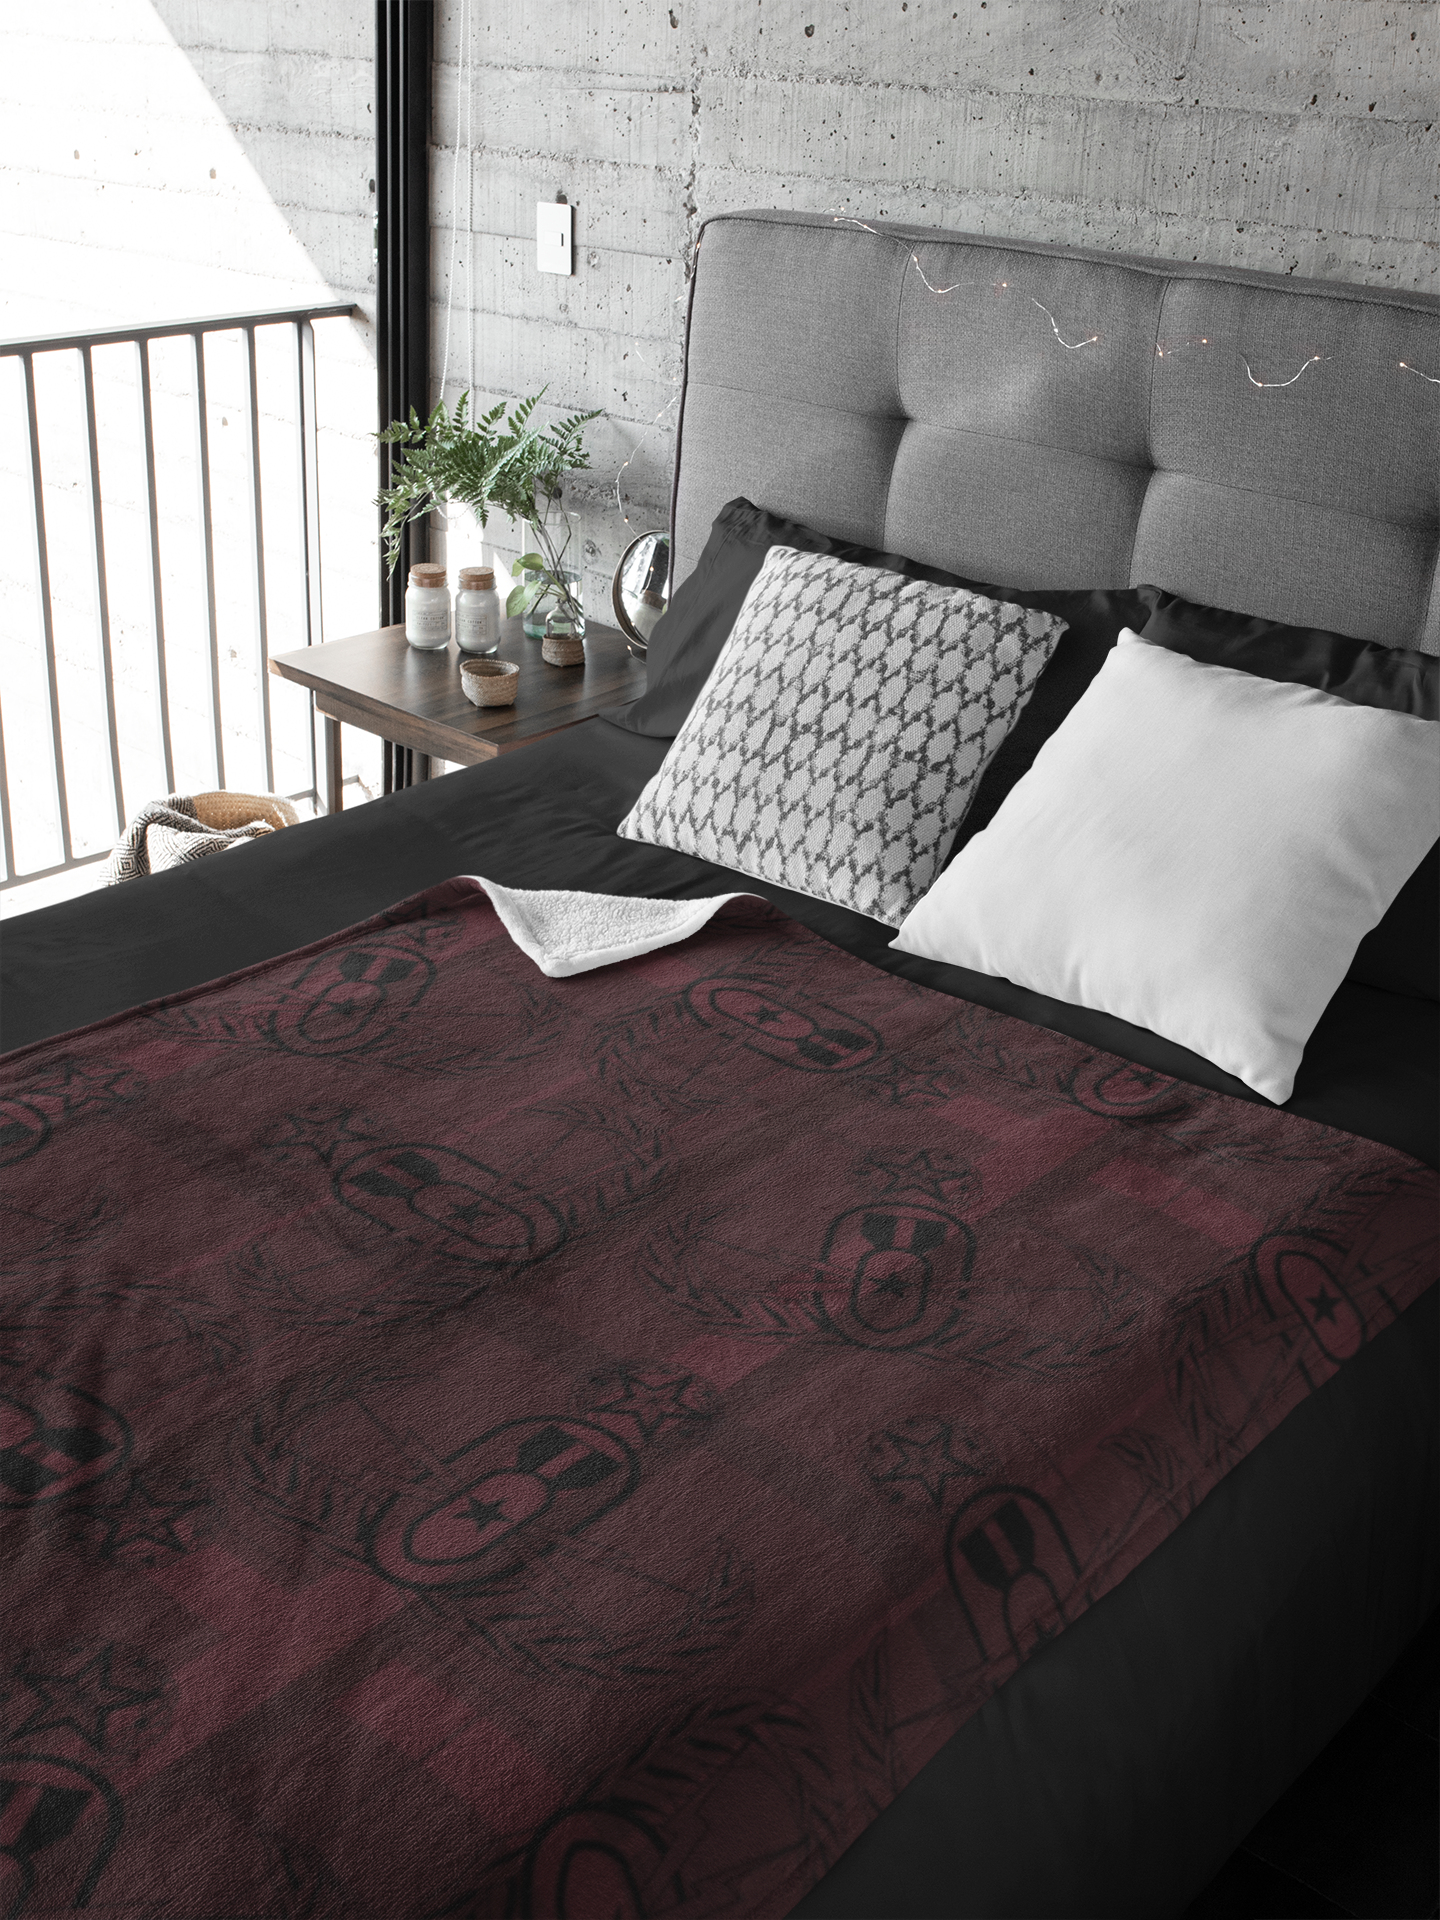 throw blanket with black clipart style EOD Master Badges evenly scattered atop ight and dark plaid design on a maroon background laying flat on a made bed.